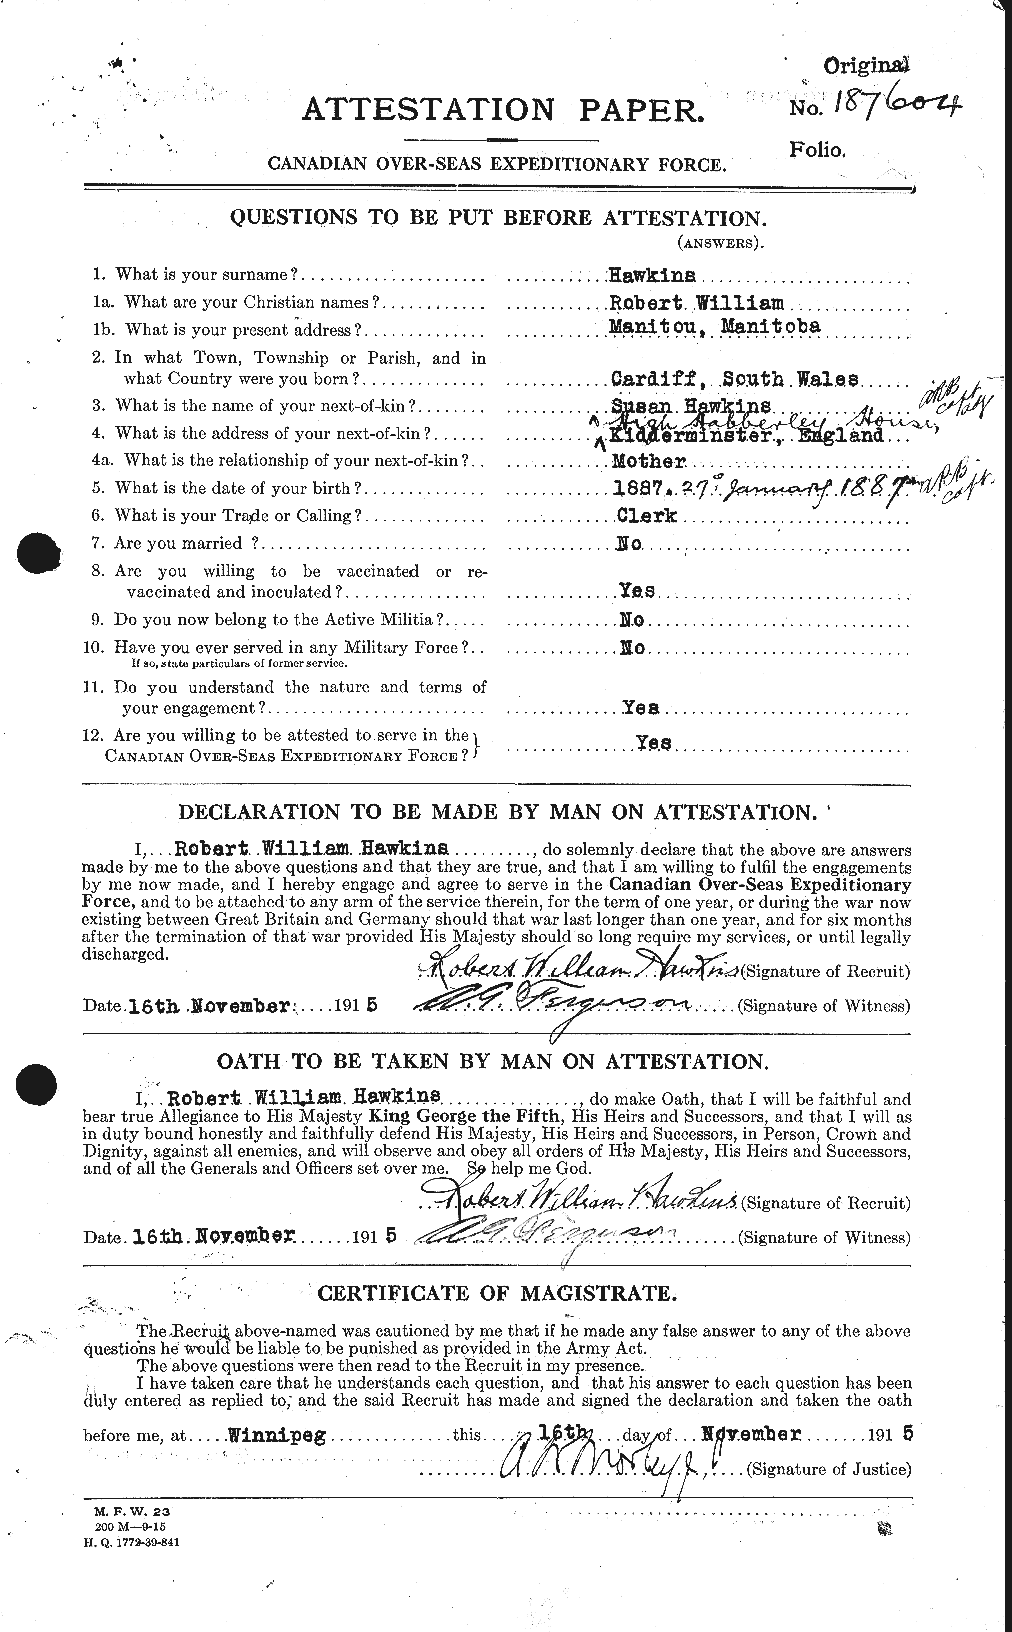 Personnel Records of the First World War - CEF 385596a